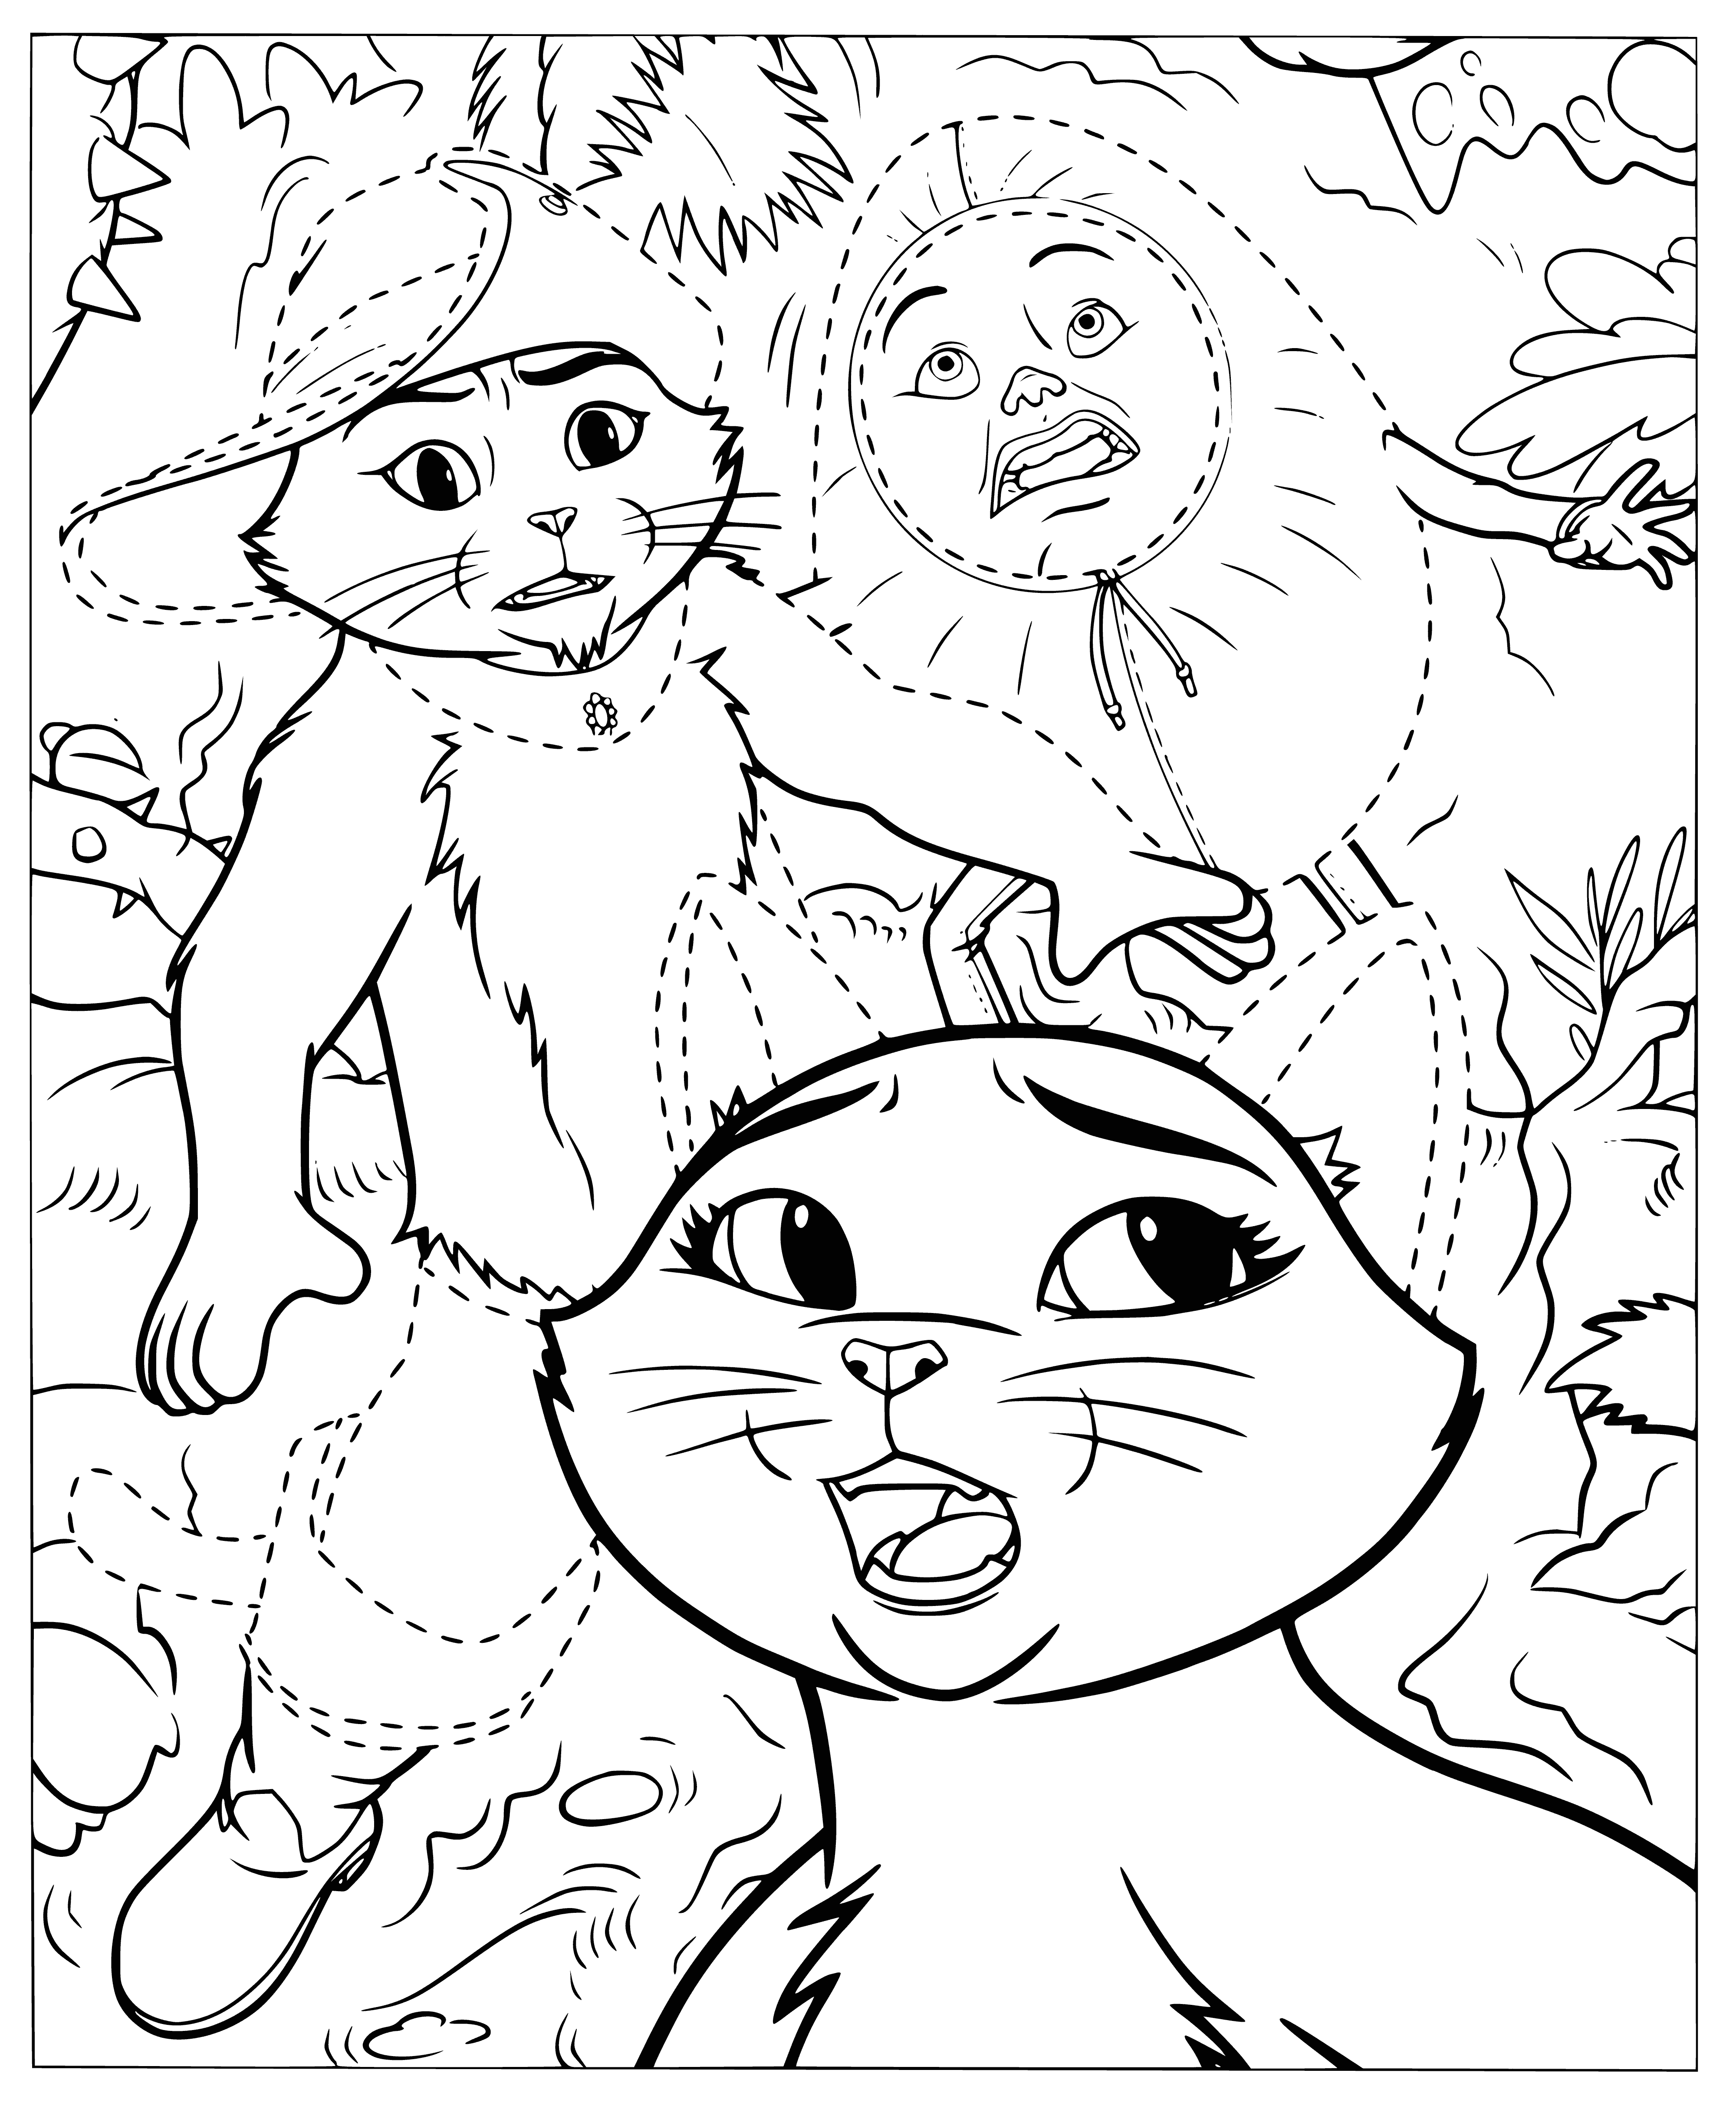 coloring page: Floating orange cat with blue hat & yellow sword smiling in the sky, having a great time!